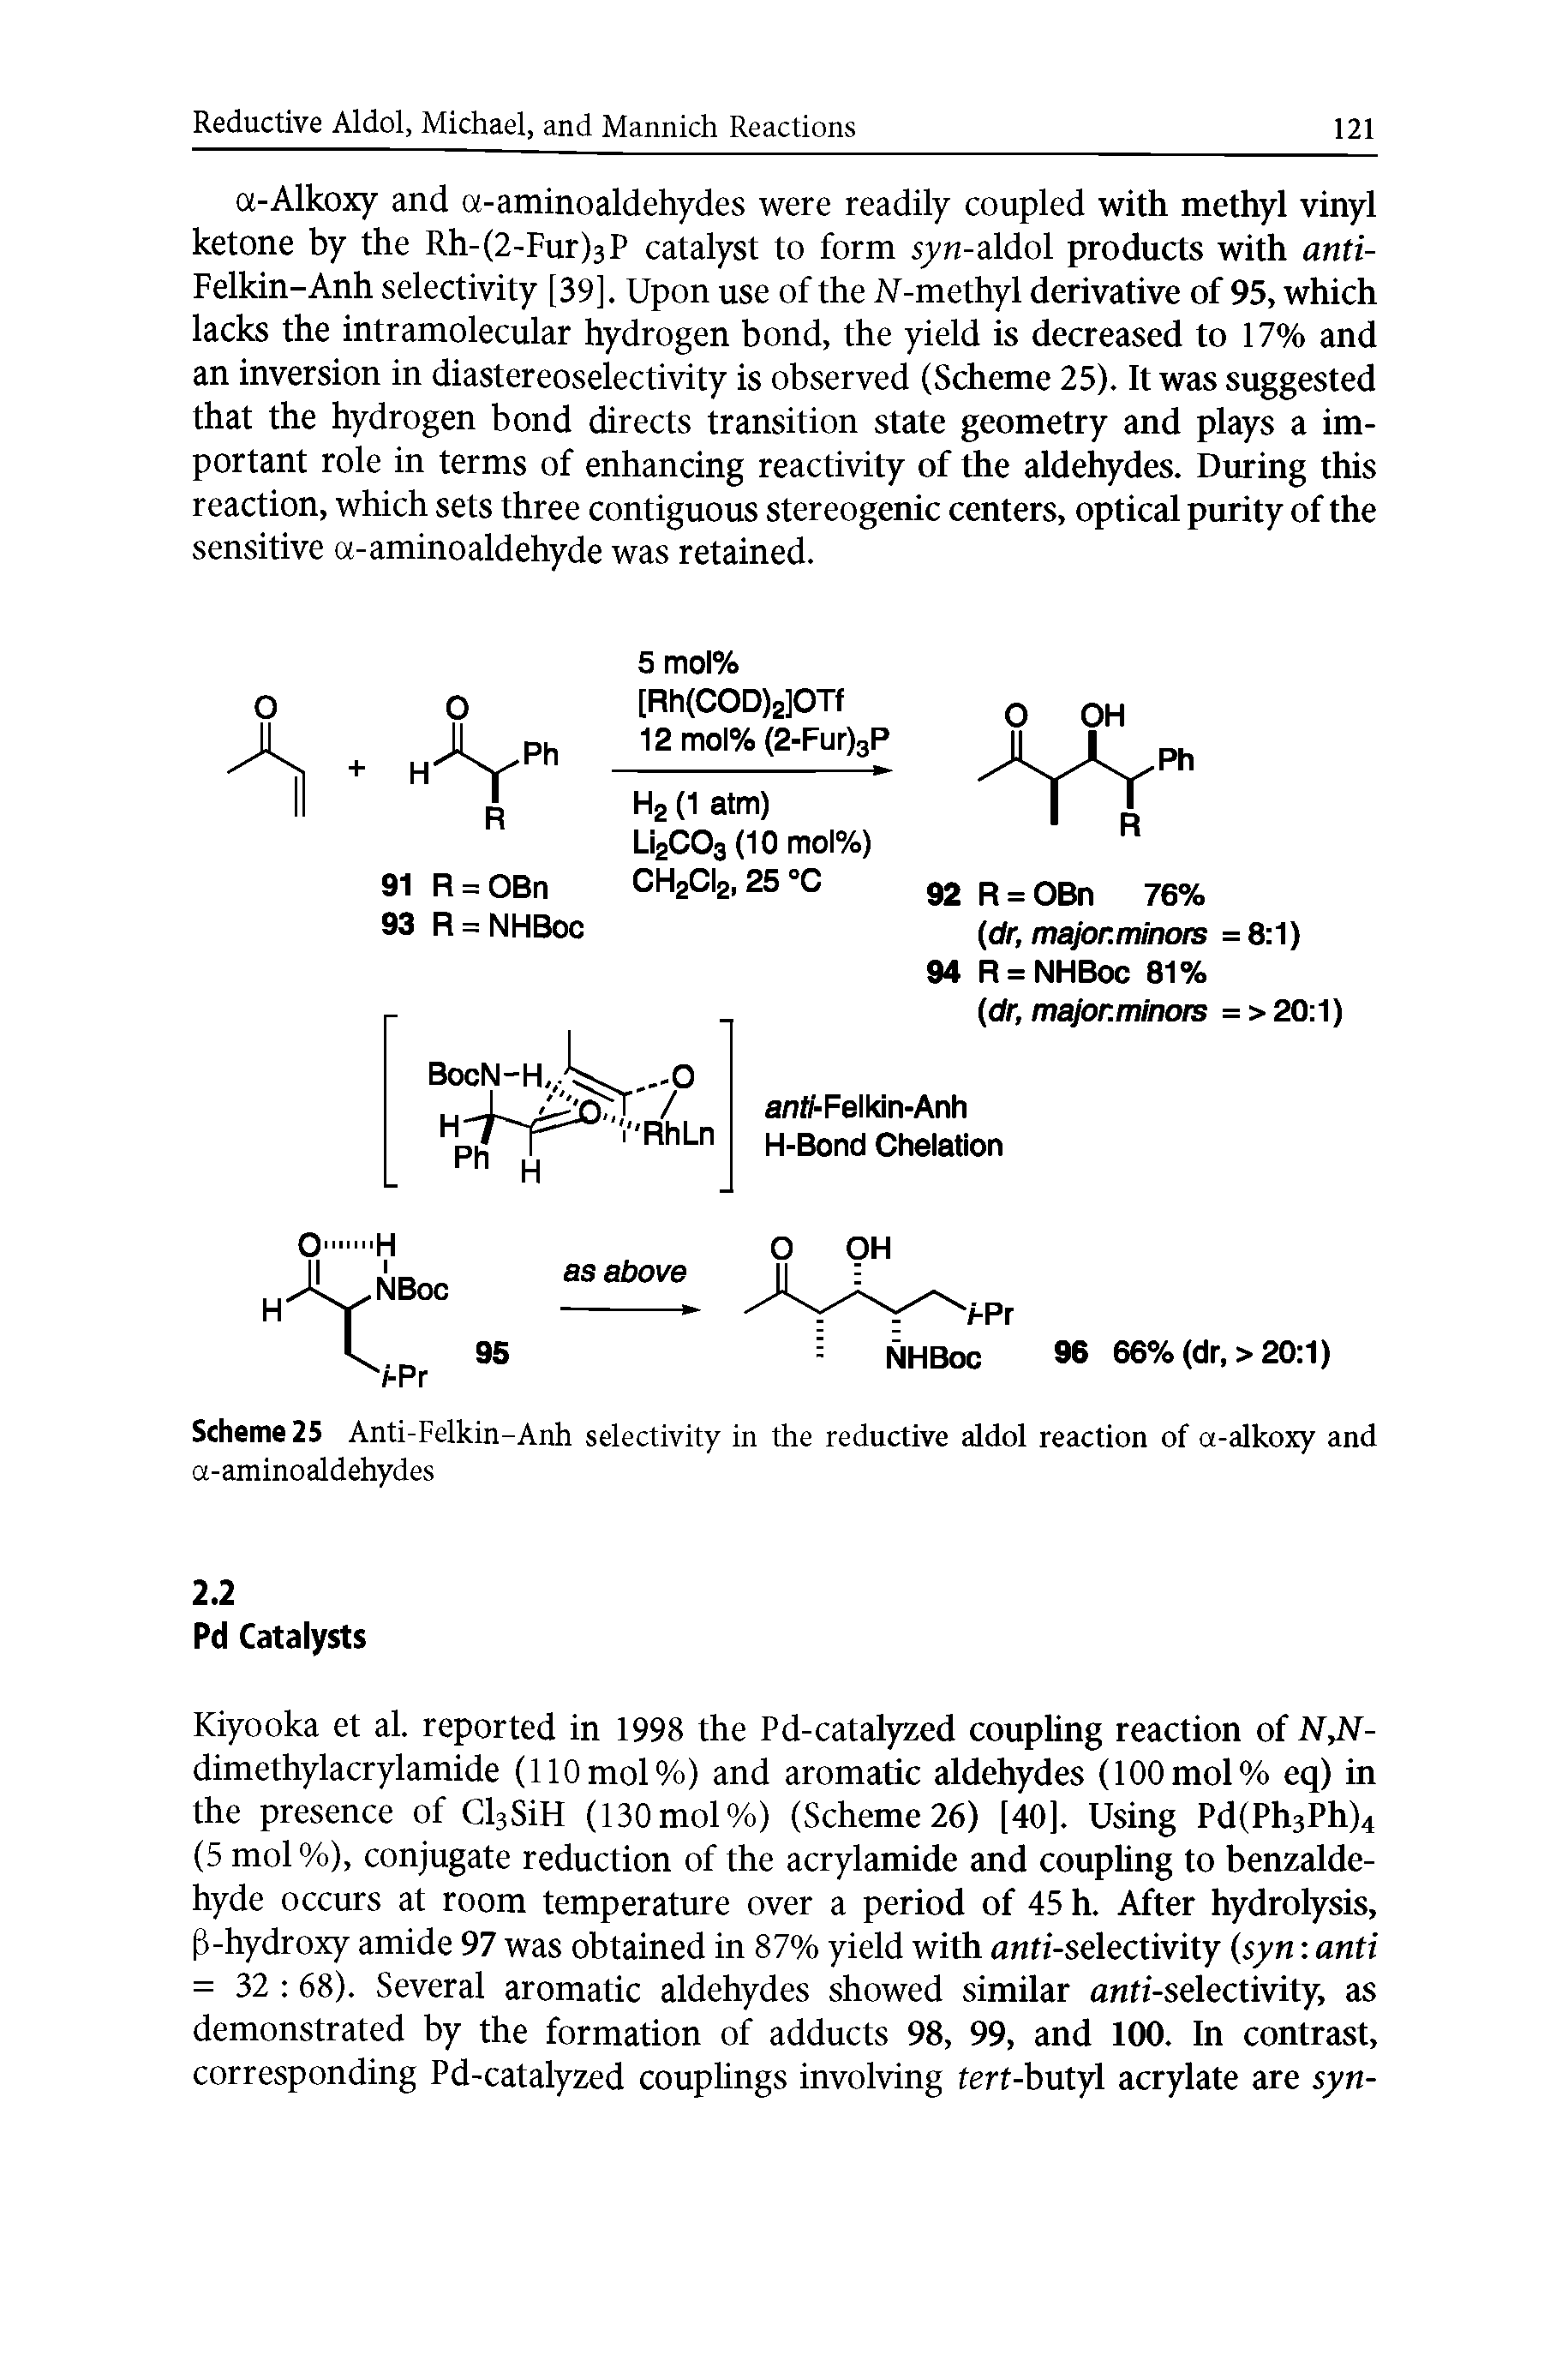 Scheme 25 Anti-Felkin-Anh selectivity in the reductive aldol reaction of a-alkoxy and a-aminoaldehydes...